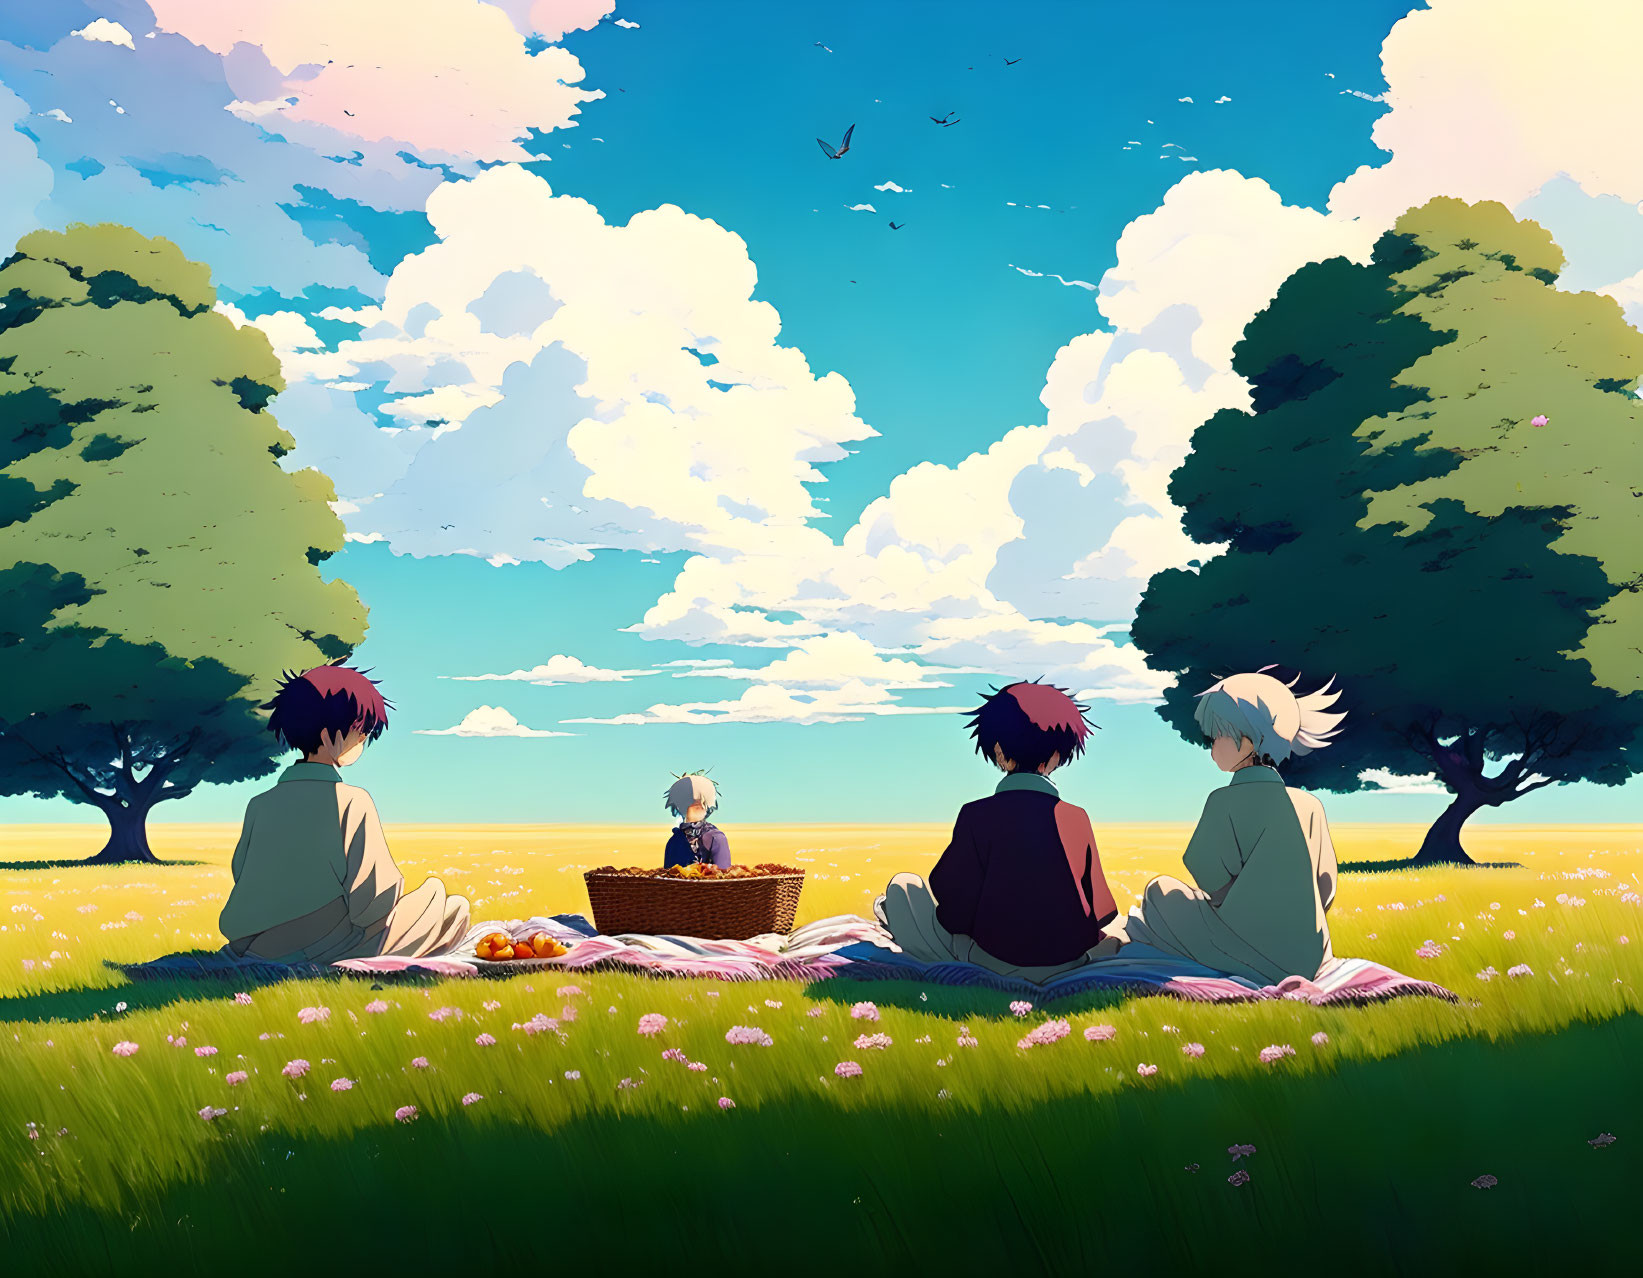 Animated characters picnic in serene field with lush trees